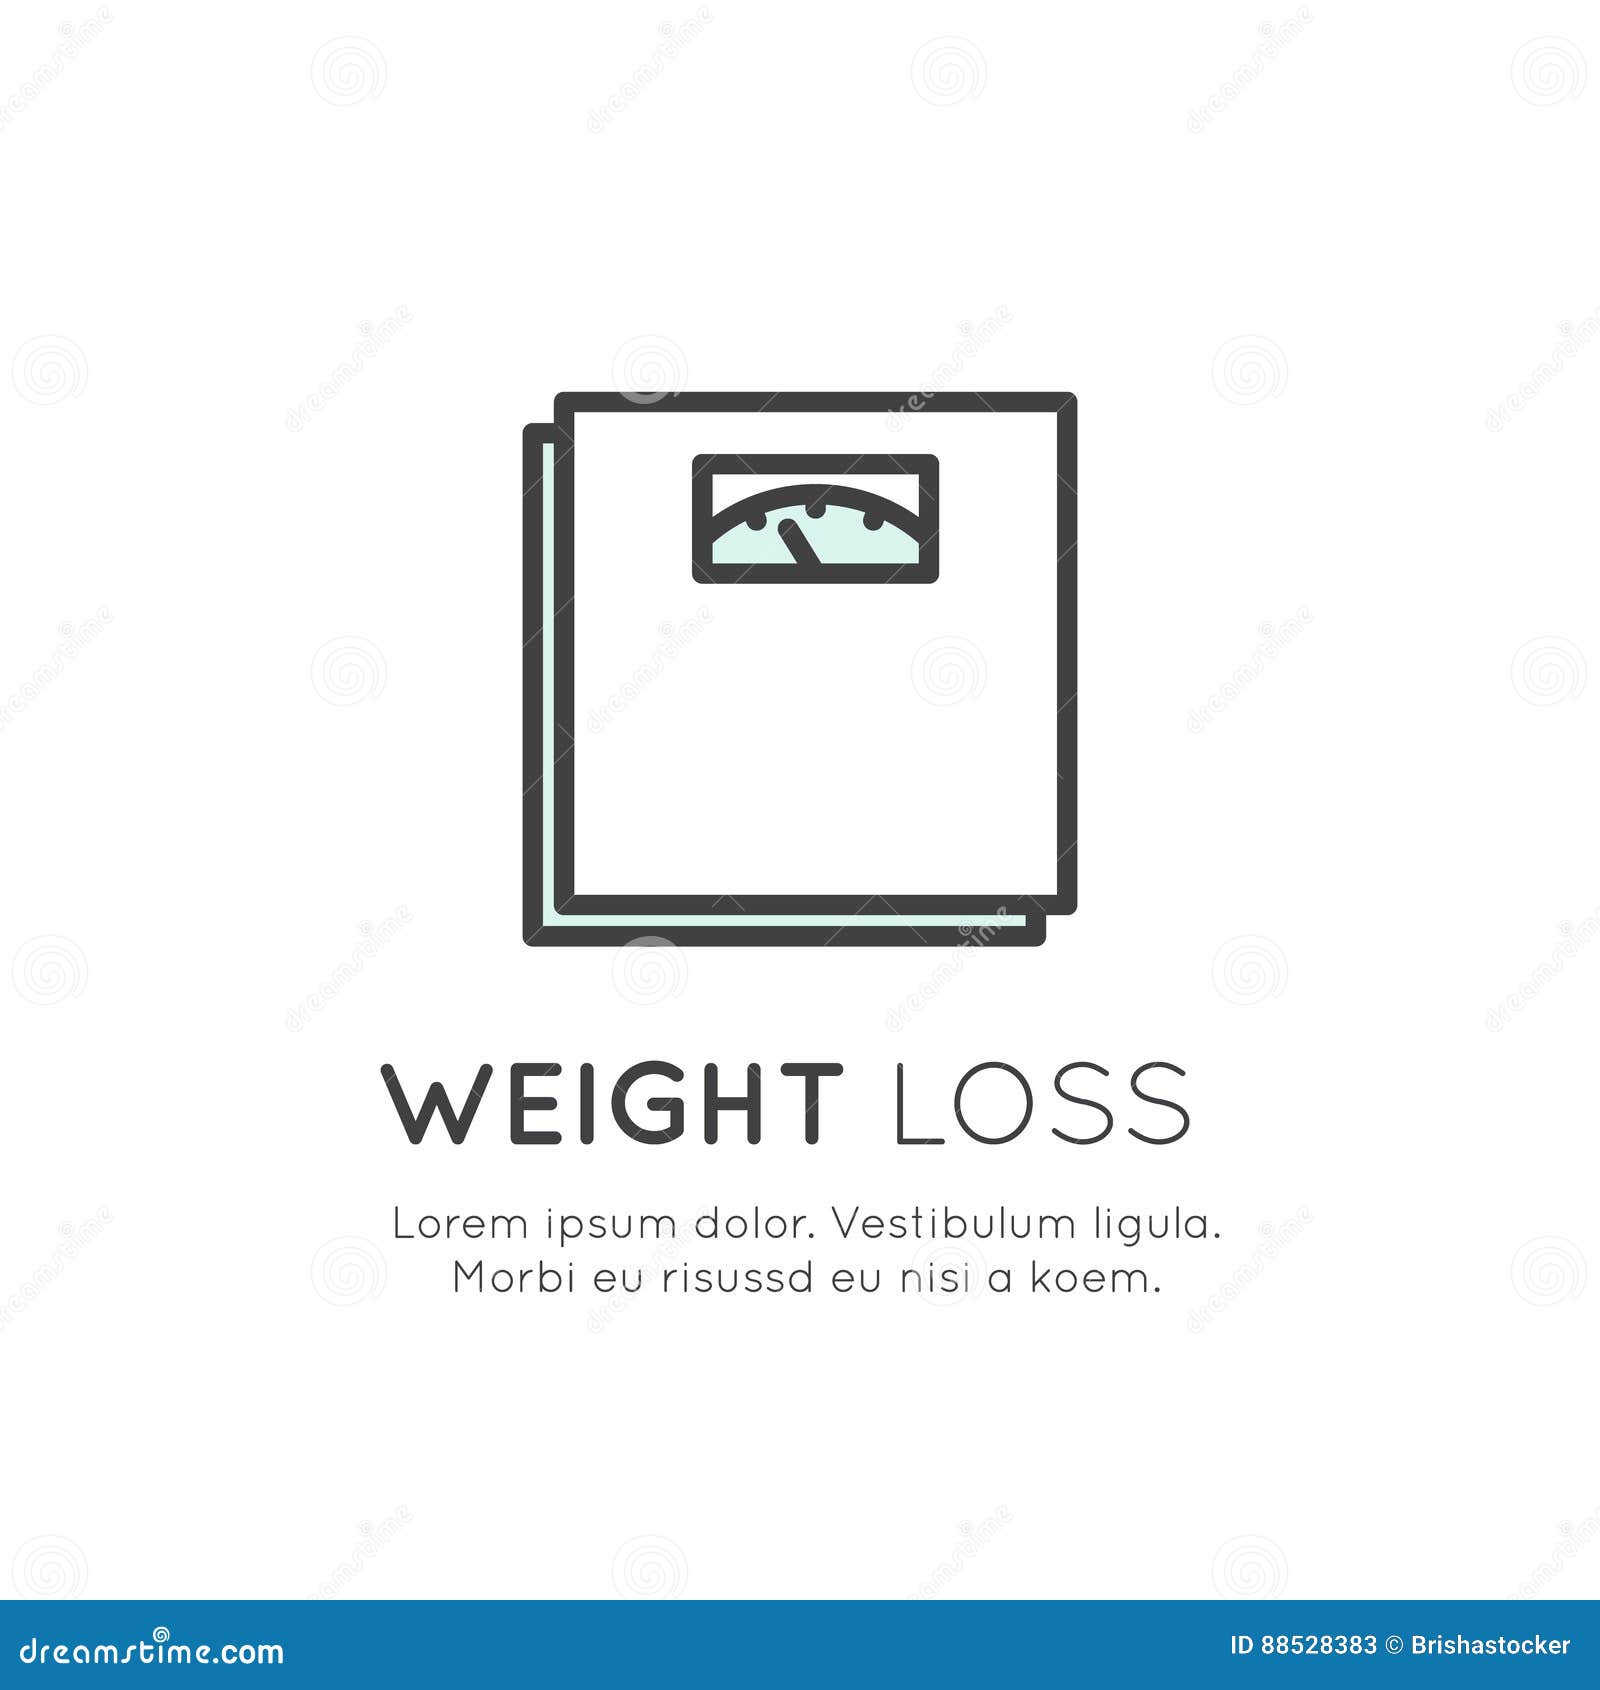 https://thumbs.dreamstime.com/z/logo-scales-weight-loss-healthy-lifestyle-diet-concept-vector-icon-style-illustration-isolated-symbols-web-88528383.jpg